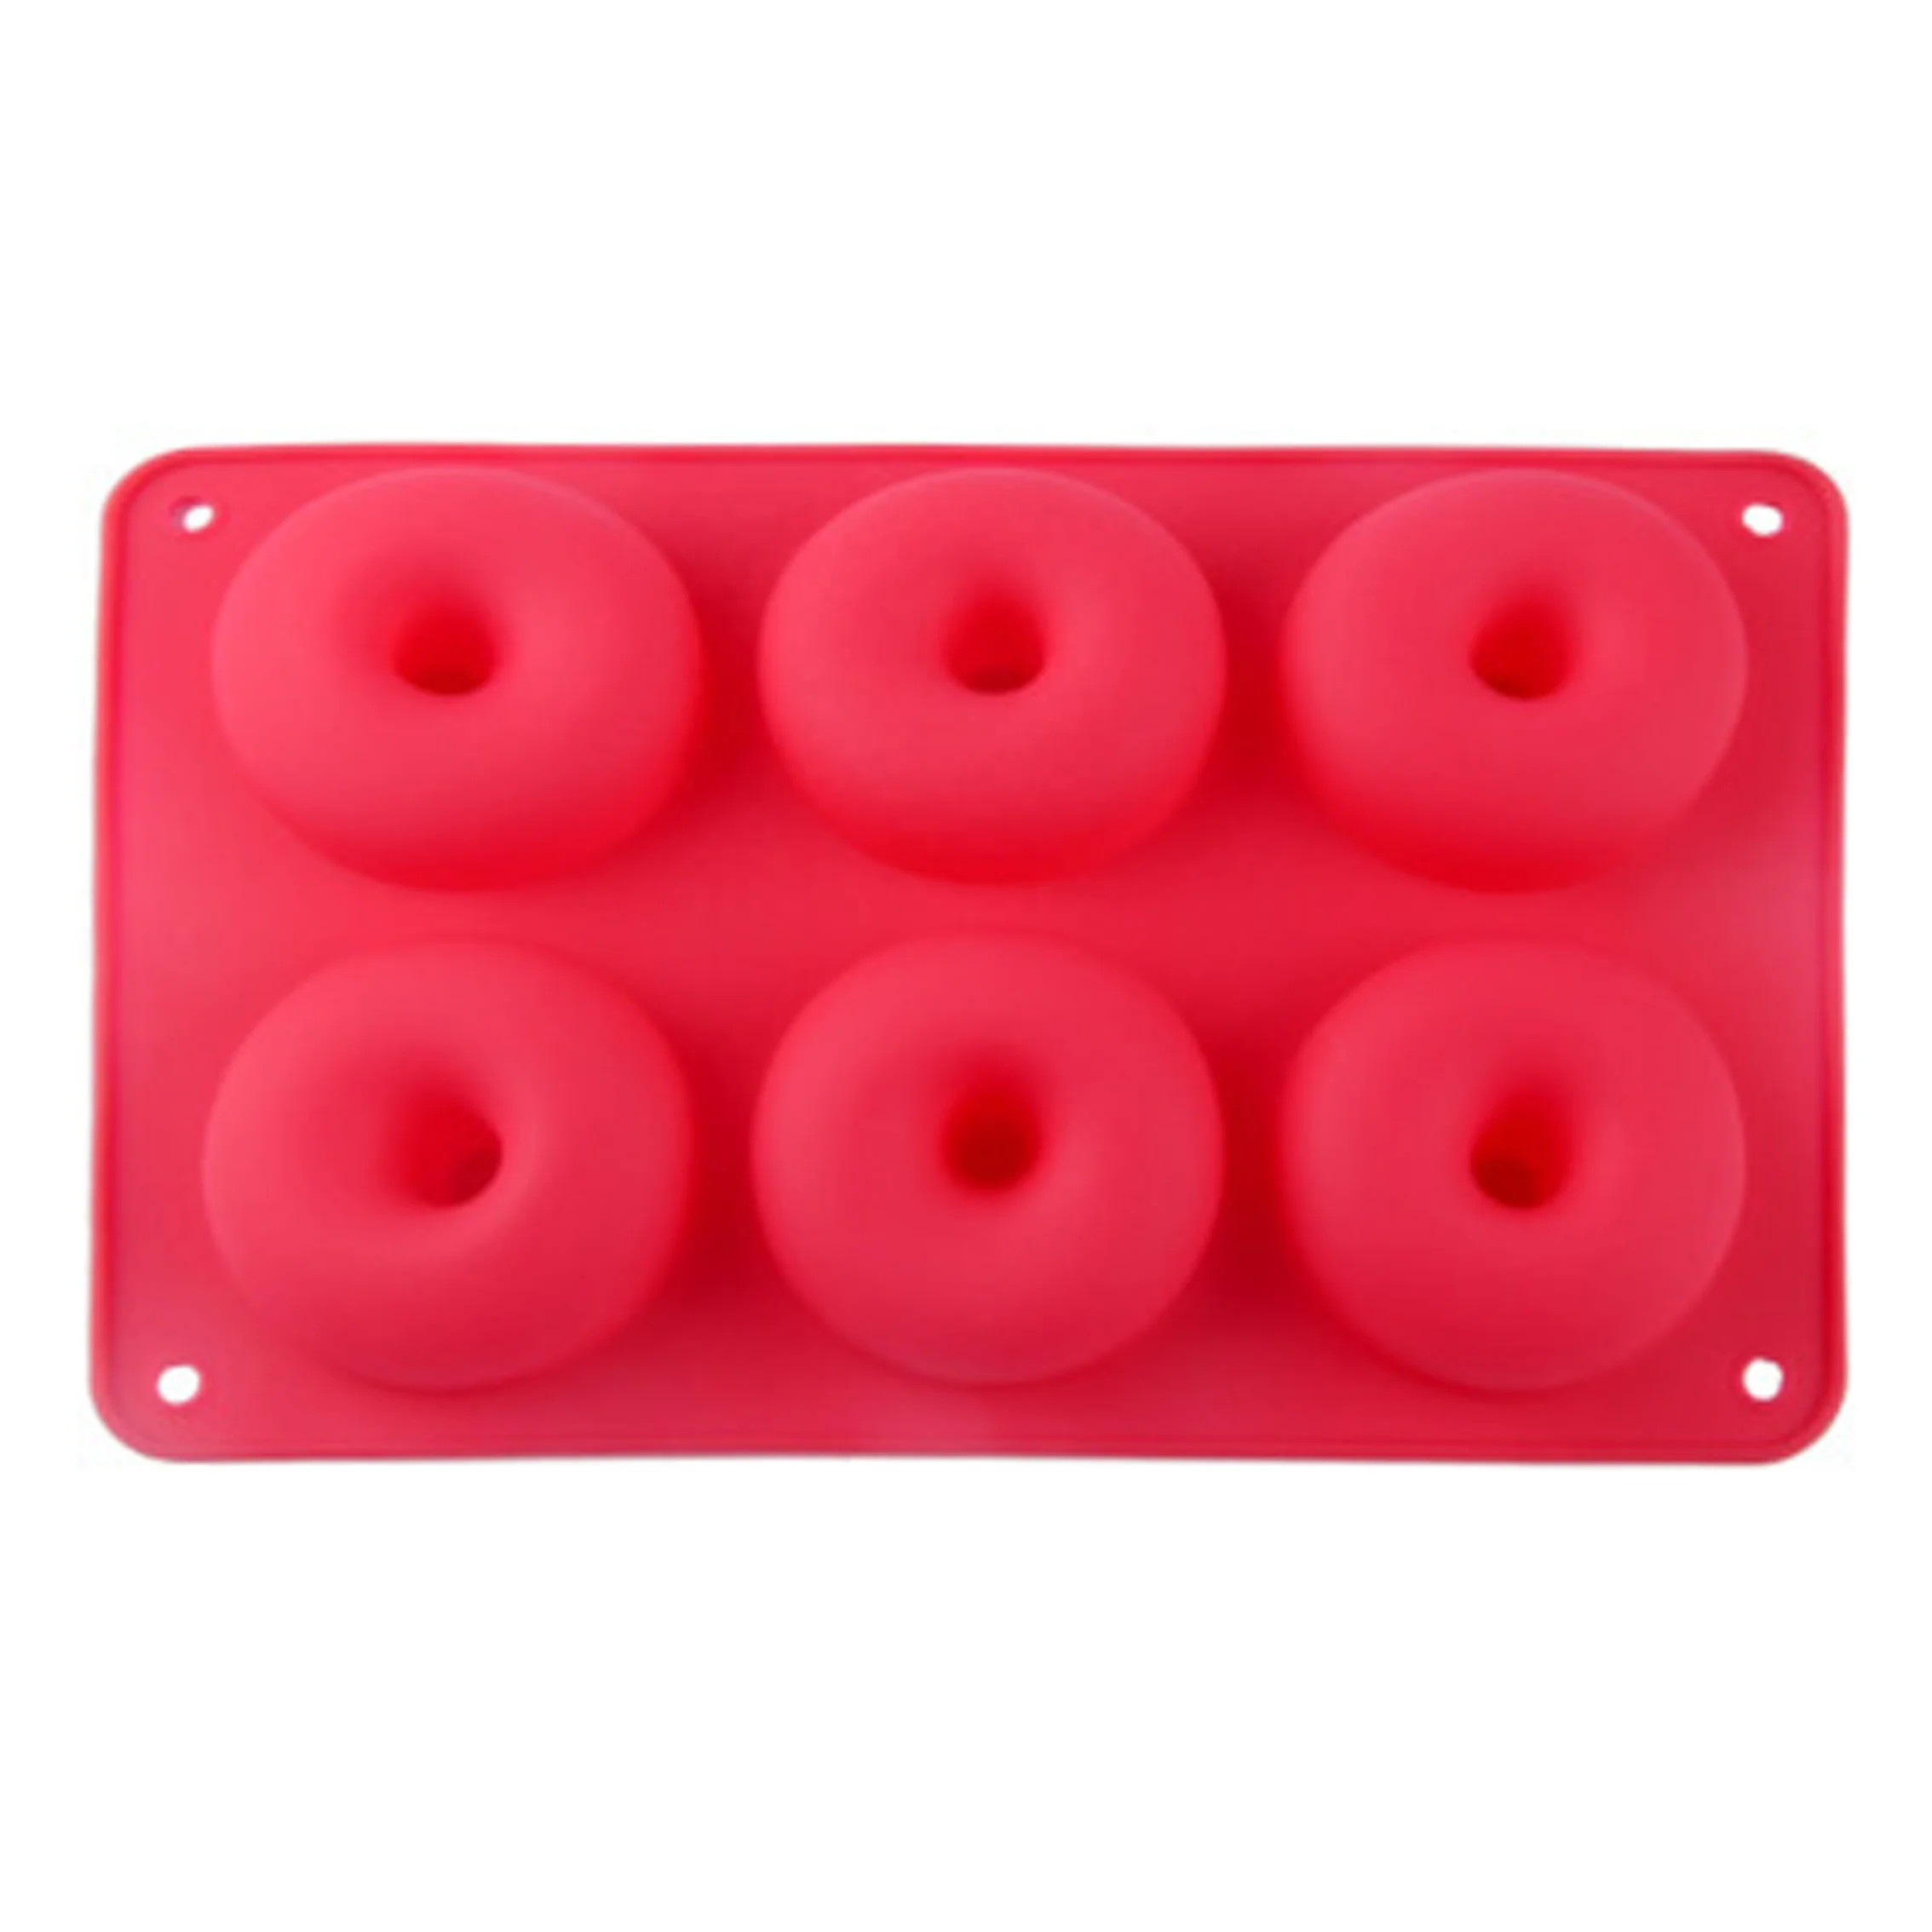 6 Cavity Donut Mold Diy Cake Mould Kitchen Tool Chocolate Biscuit Cake Mold Non-Stick Candy 3D Mold Silicone Donut Baking Pan